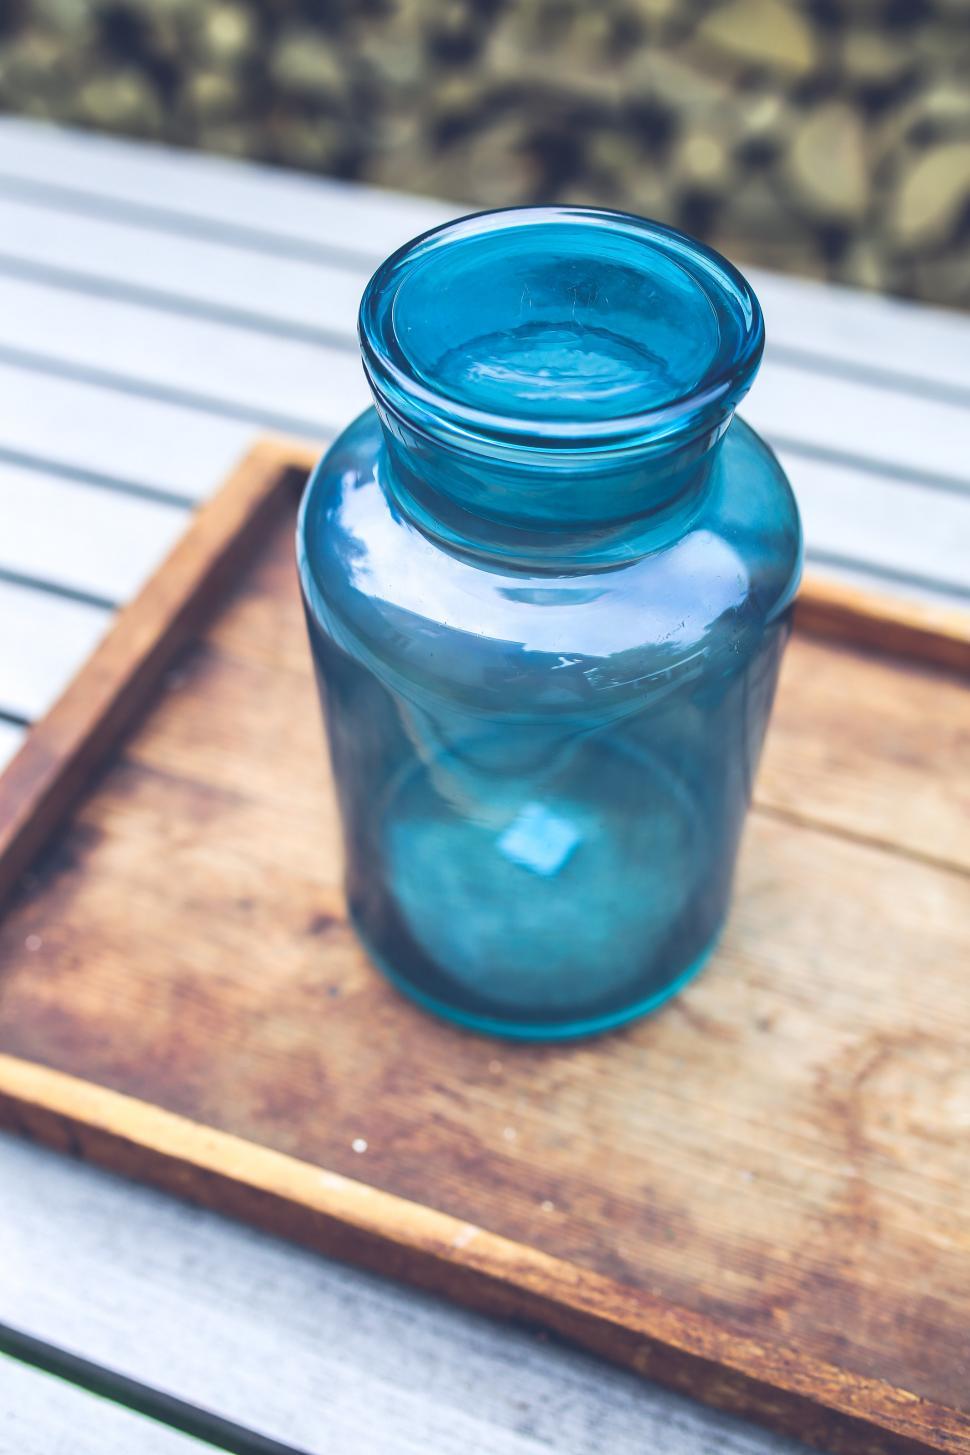 Free Image of Blue Glass Jar on Wooden Tray 